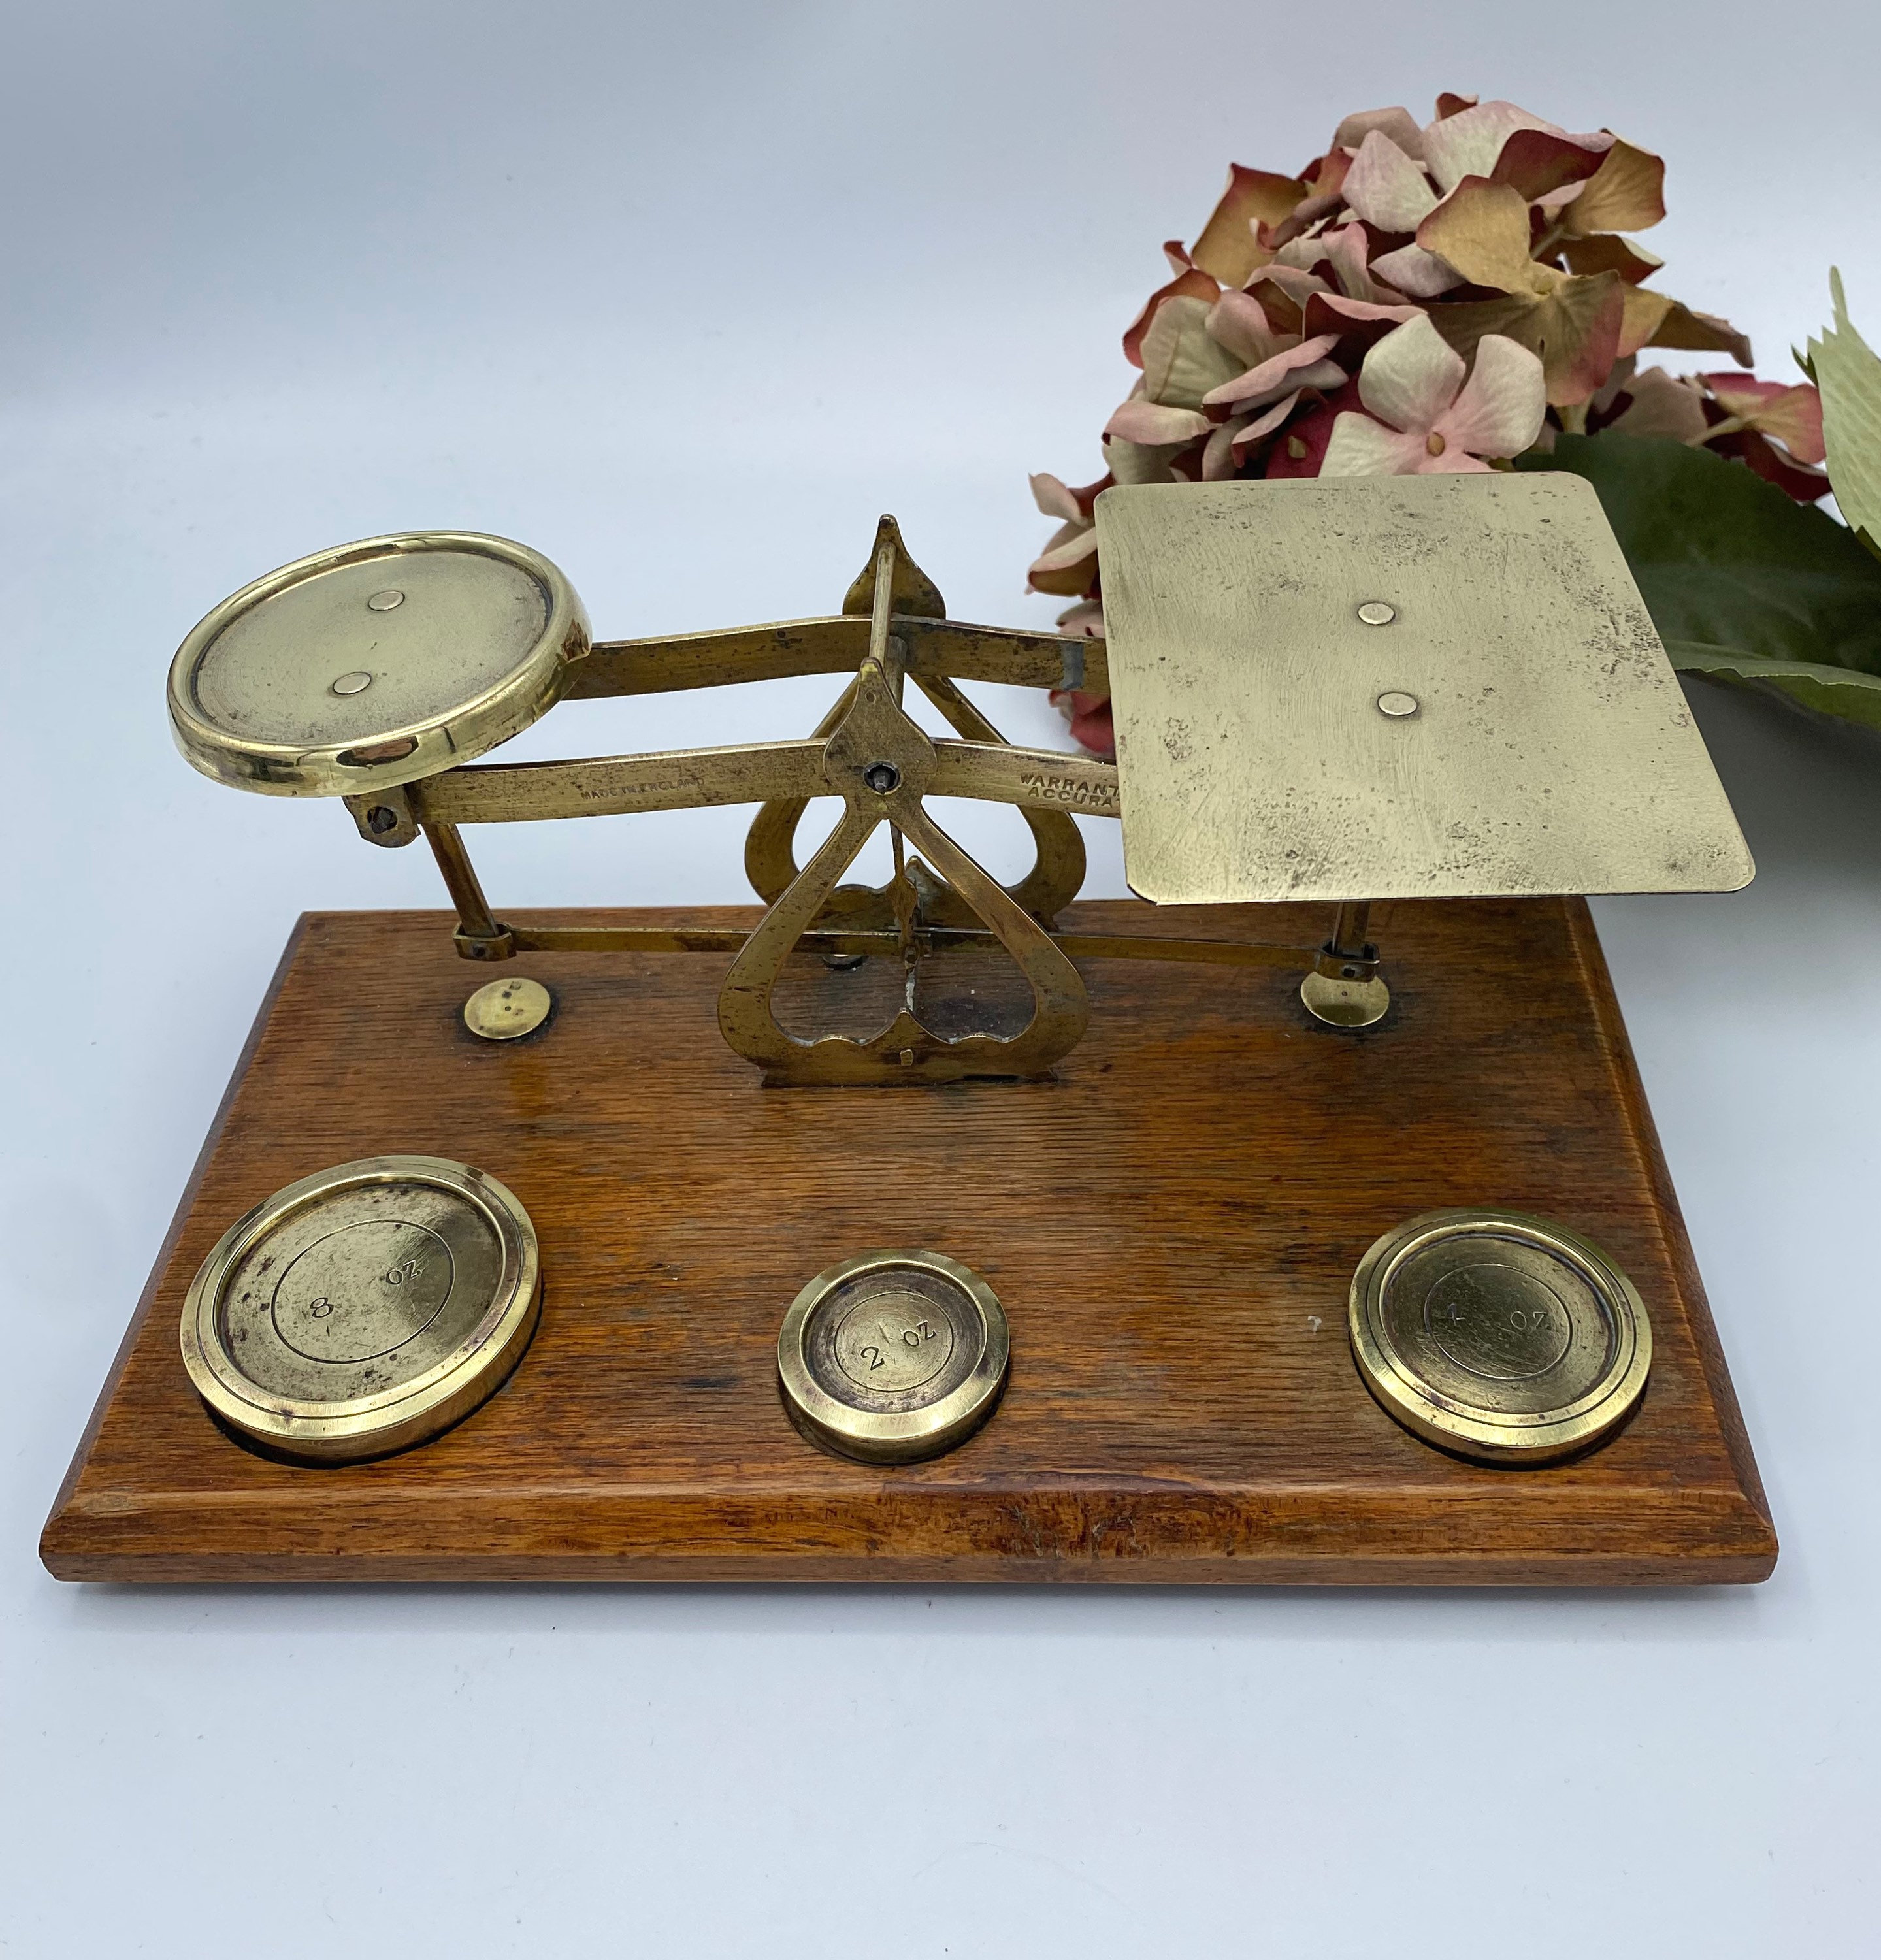 Antique Brass Postal Scale for Letters, 1/2 oz., 1oz., 2oz. brass weights